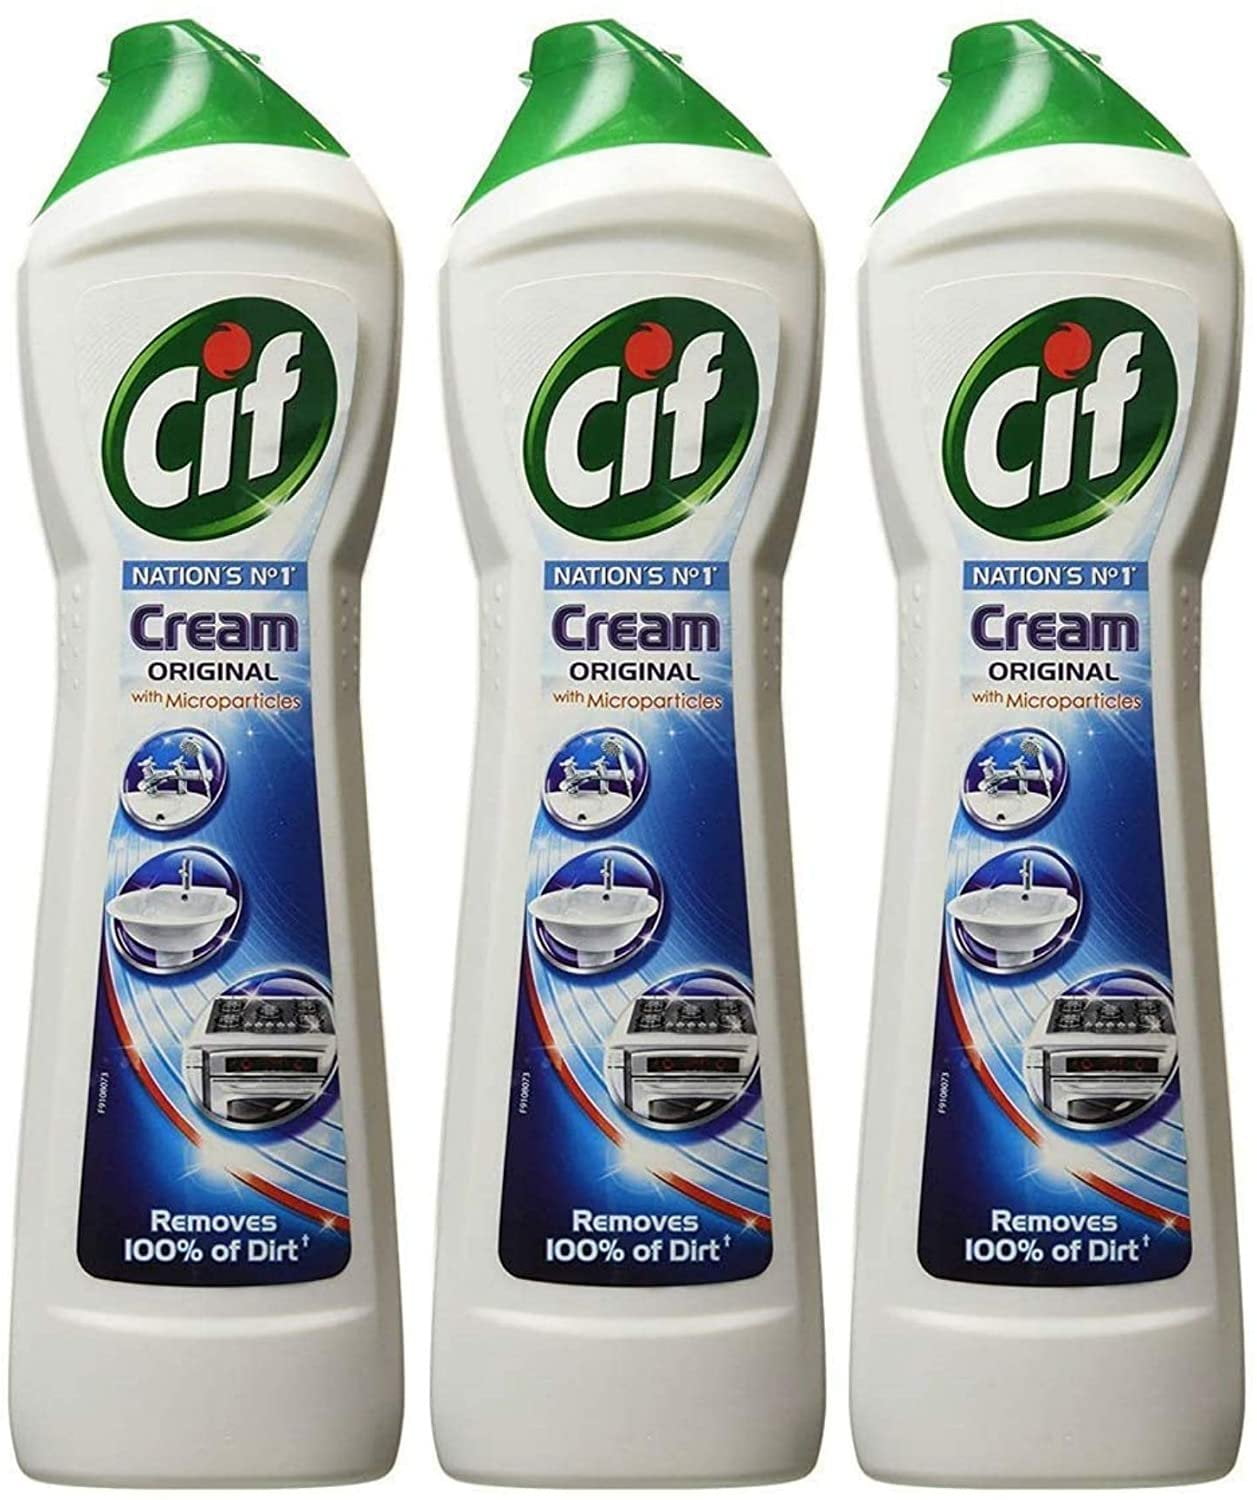 Cif Cream Cleaner Winter Indulgence Limited Edition 500 ml